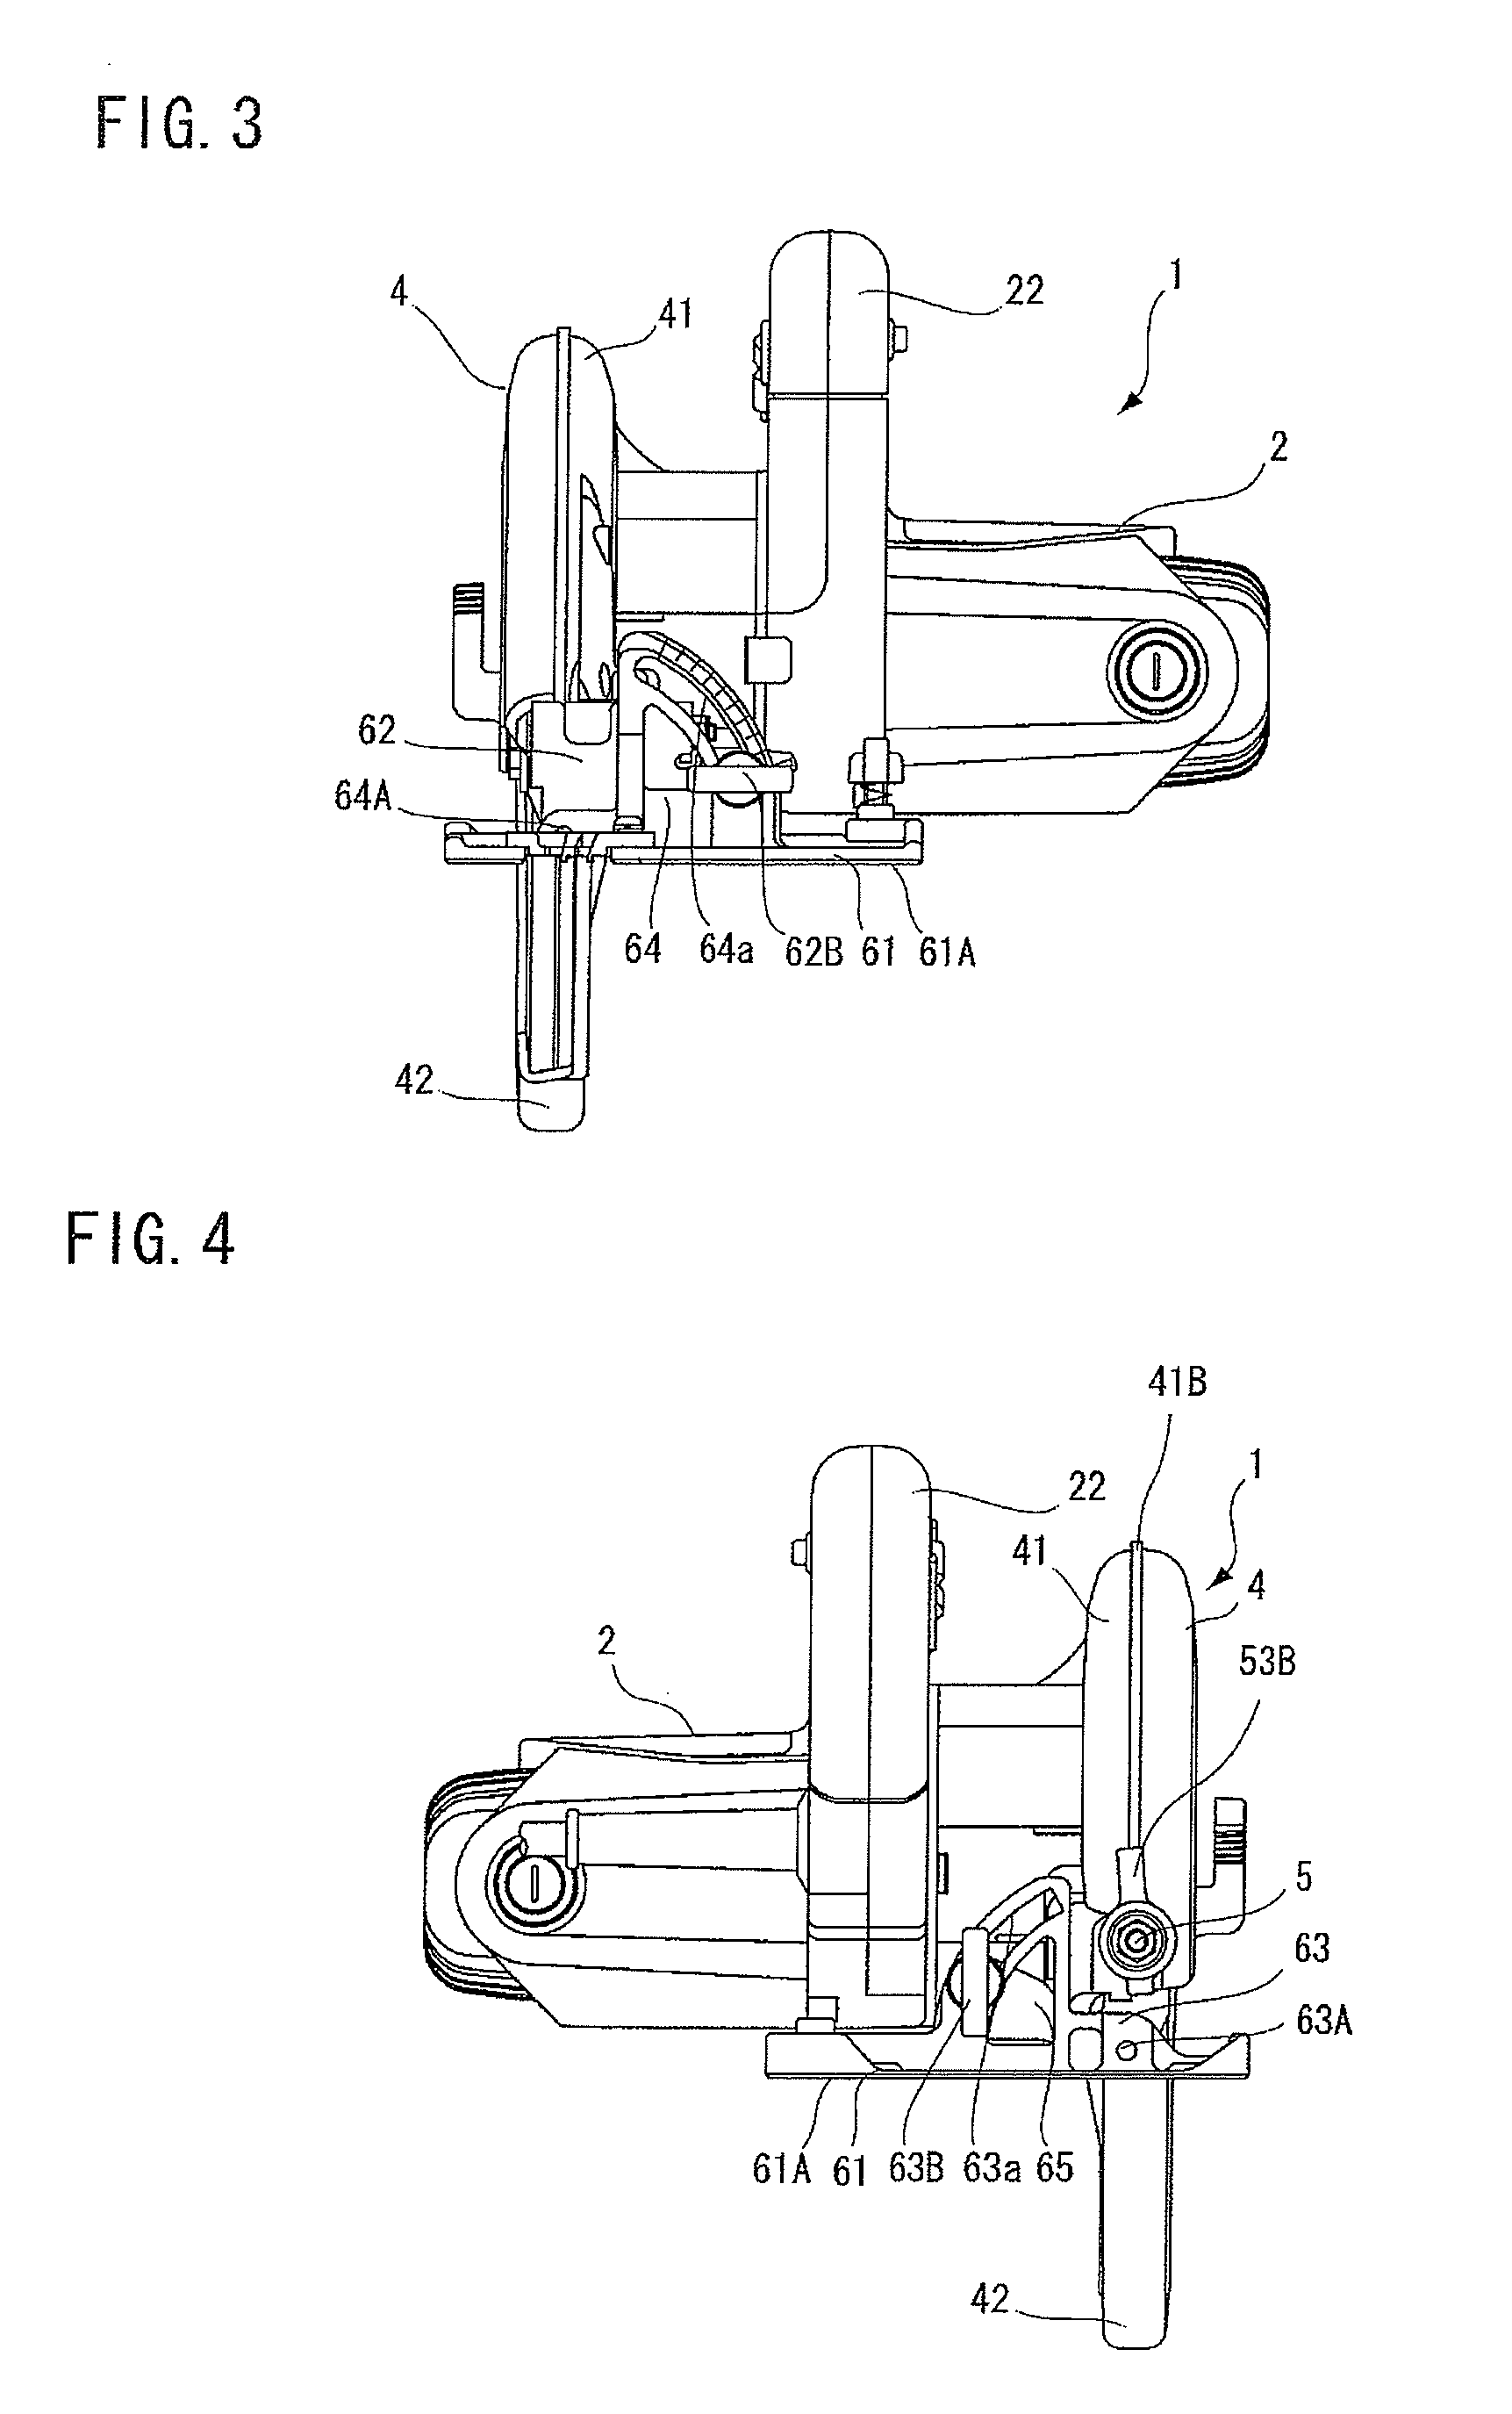 Portable cutting device capable of adjusting cutting depth